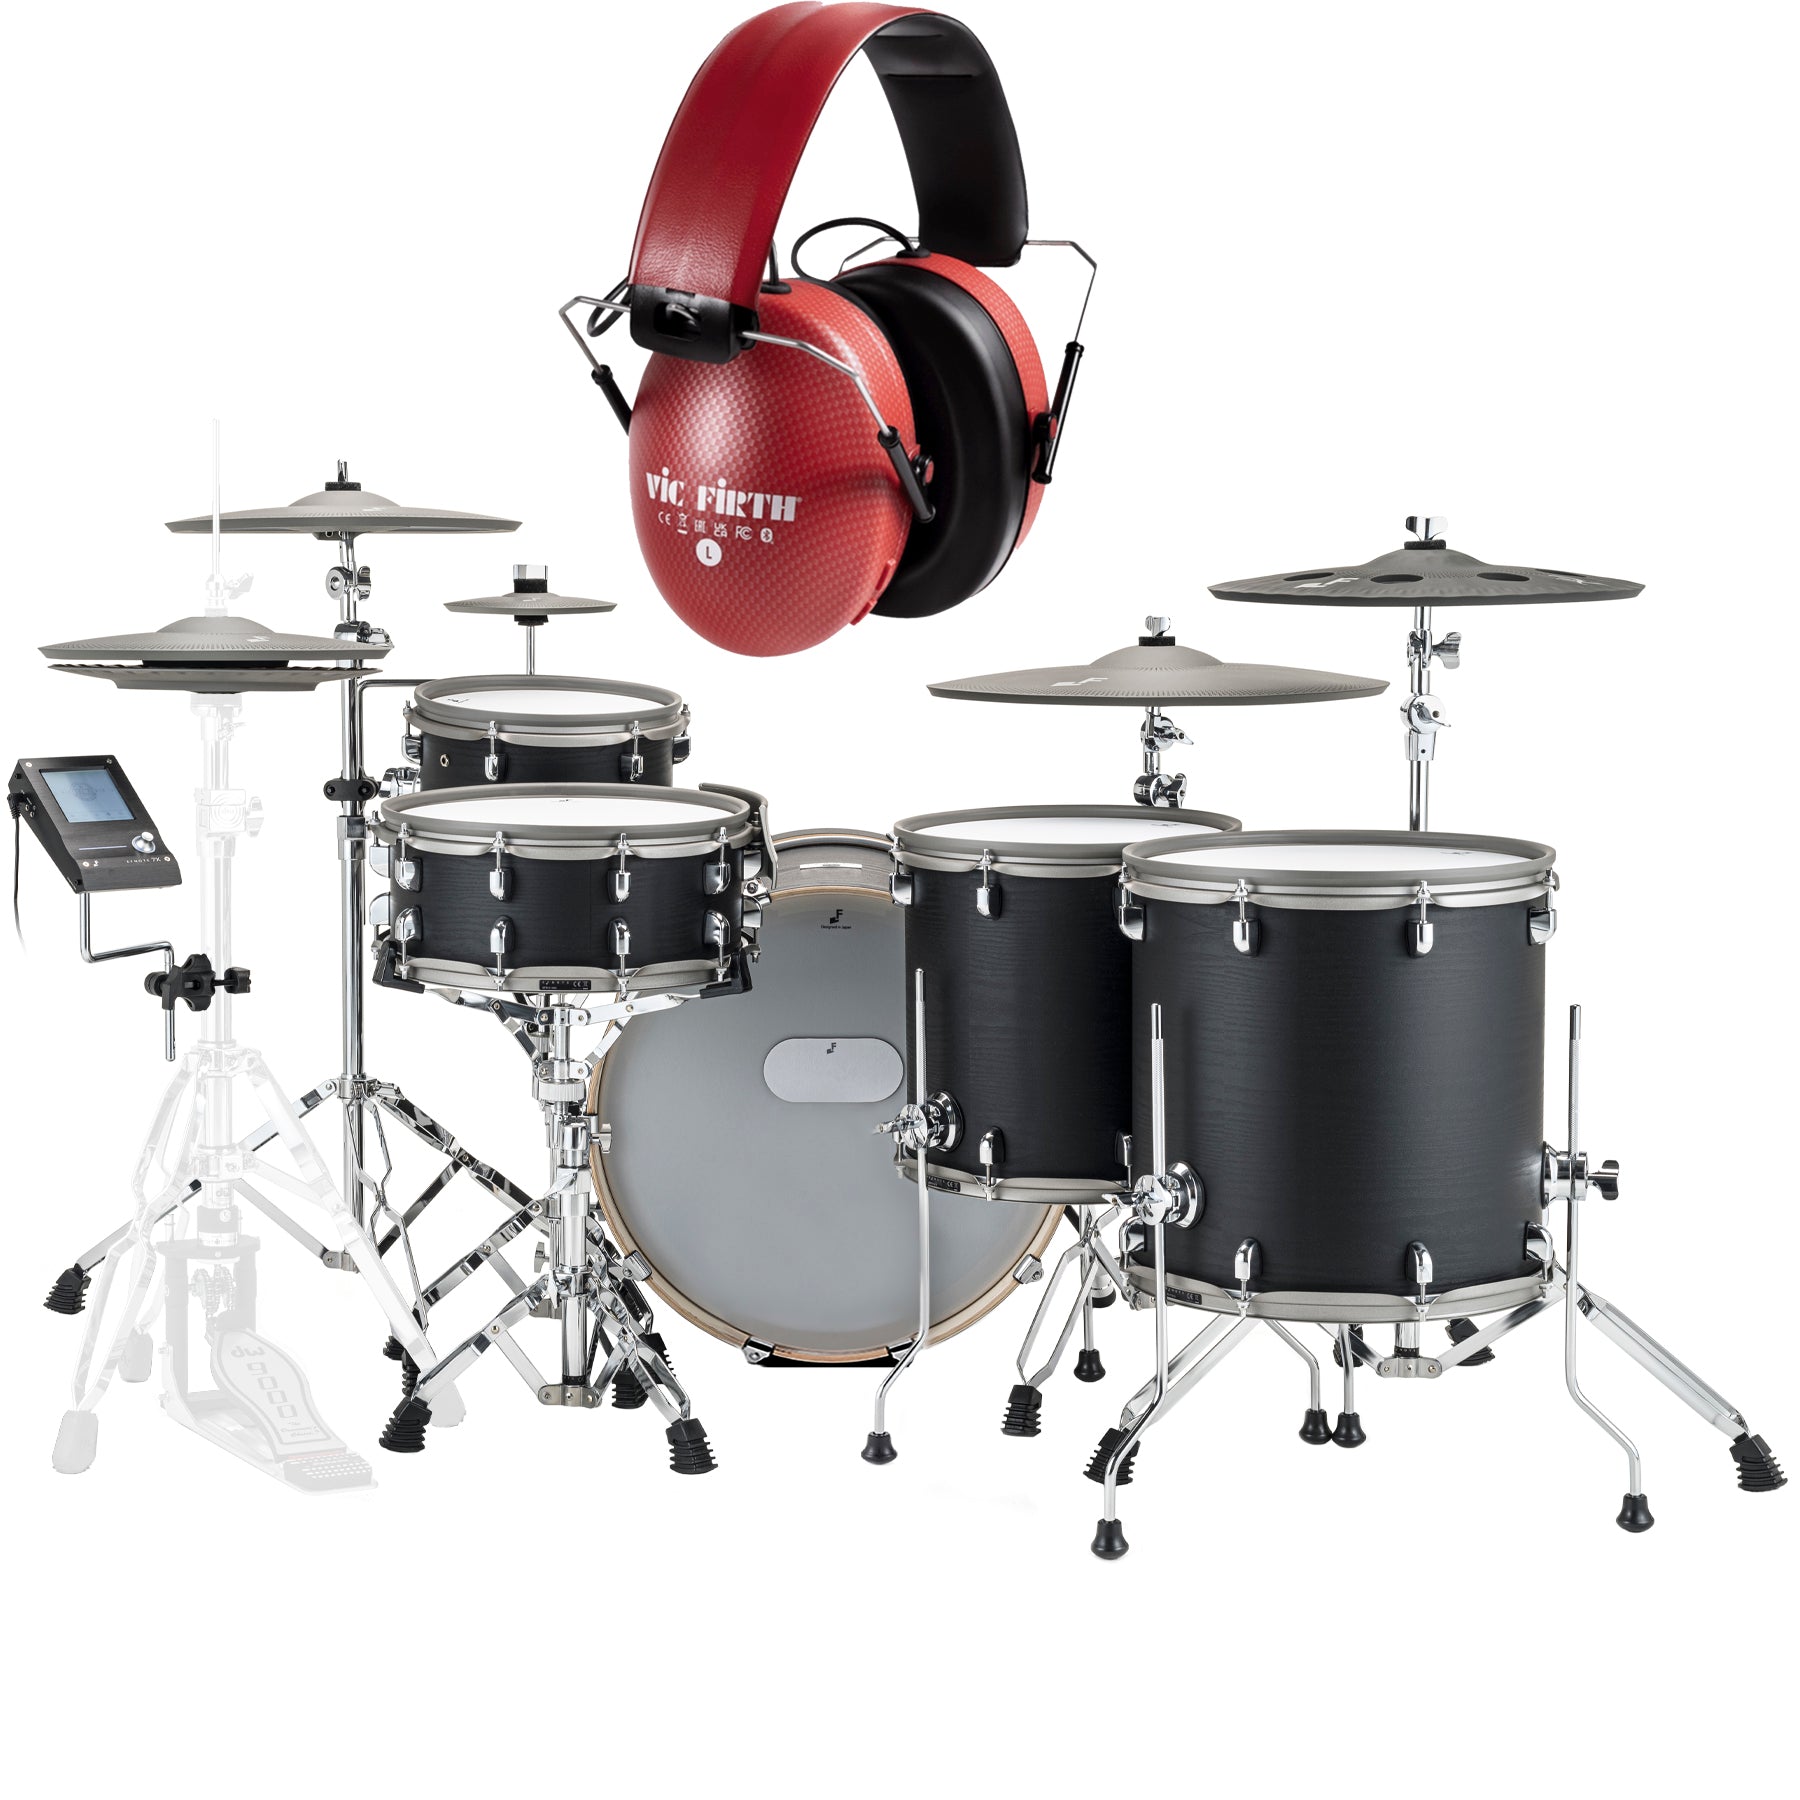 Collage of the components in the EFNOTE 7X Electronic Drum Set BONUS PAK bundle